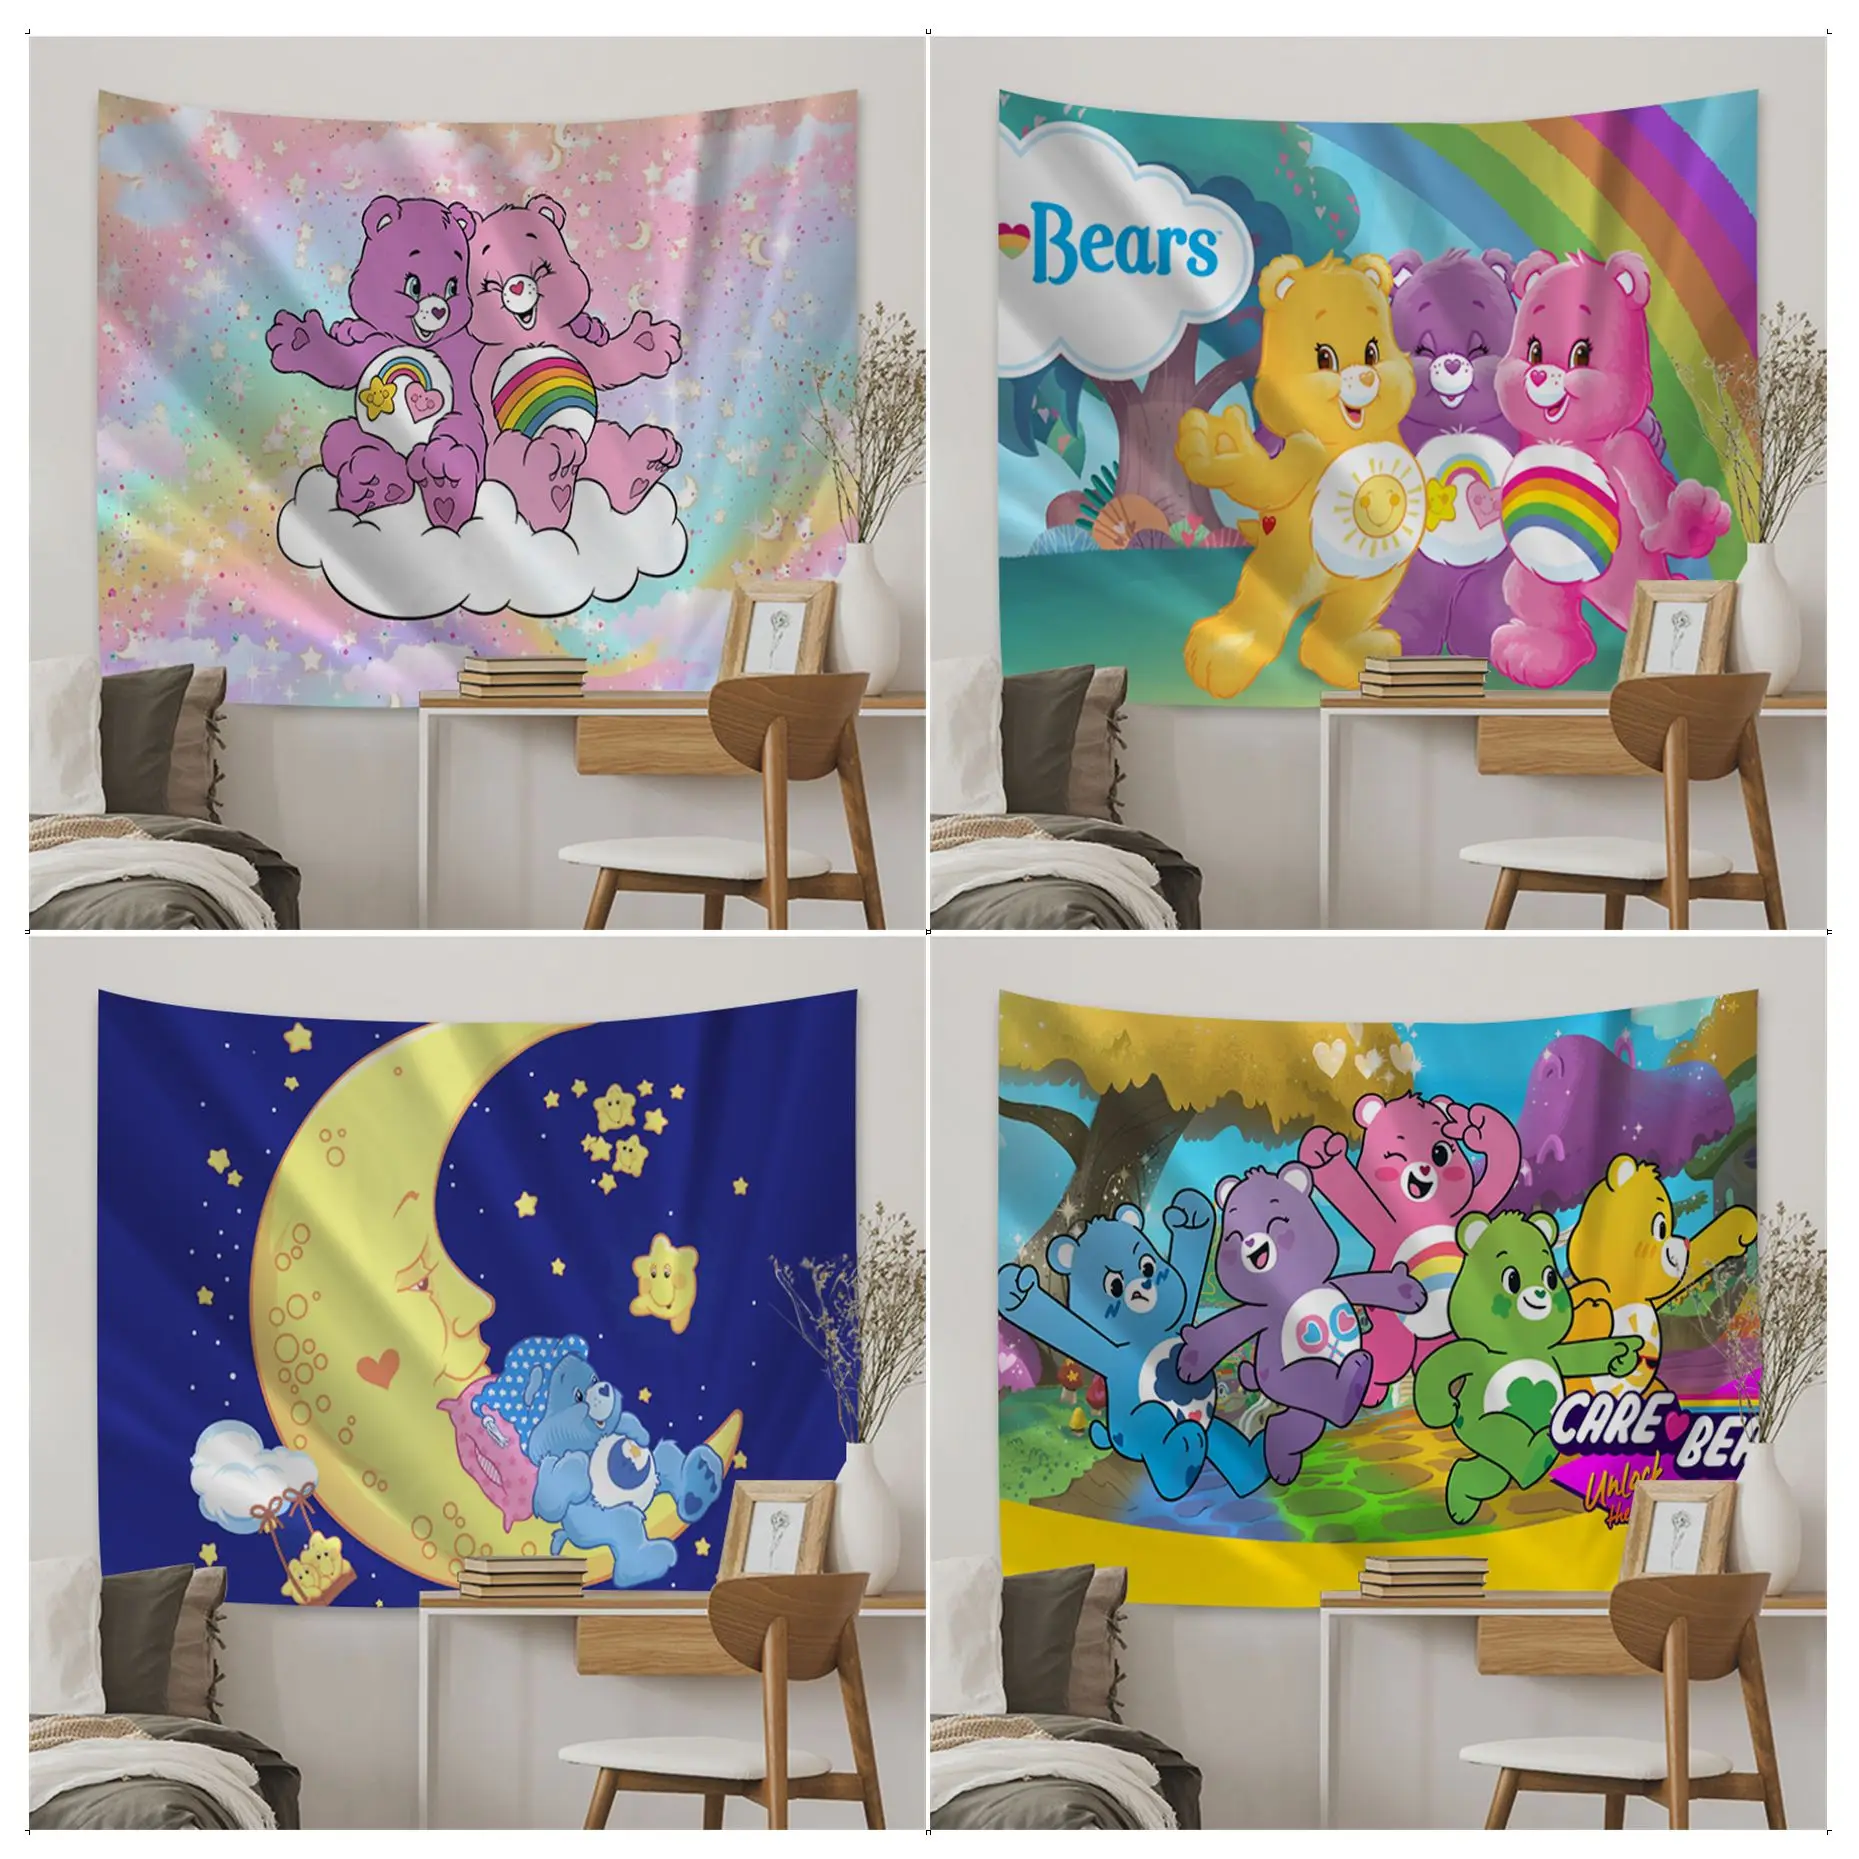 

Care-B-Bears Tapestry Cartoon Tapestry Art Science Fiction Room Home Decor Wall Hanging Sheets